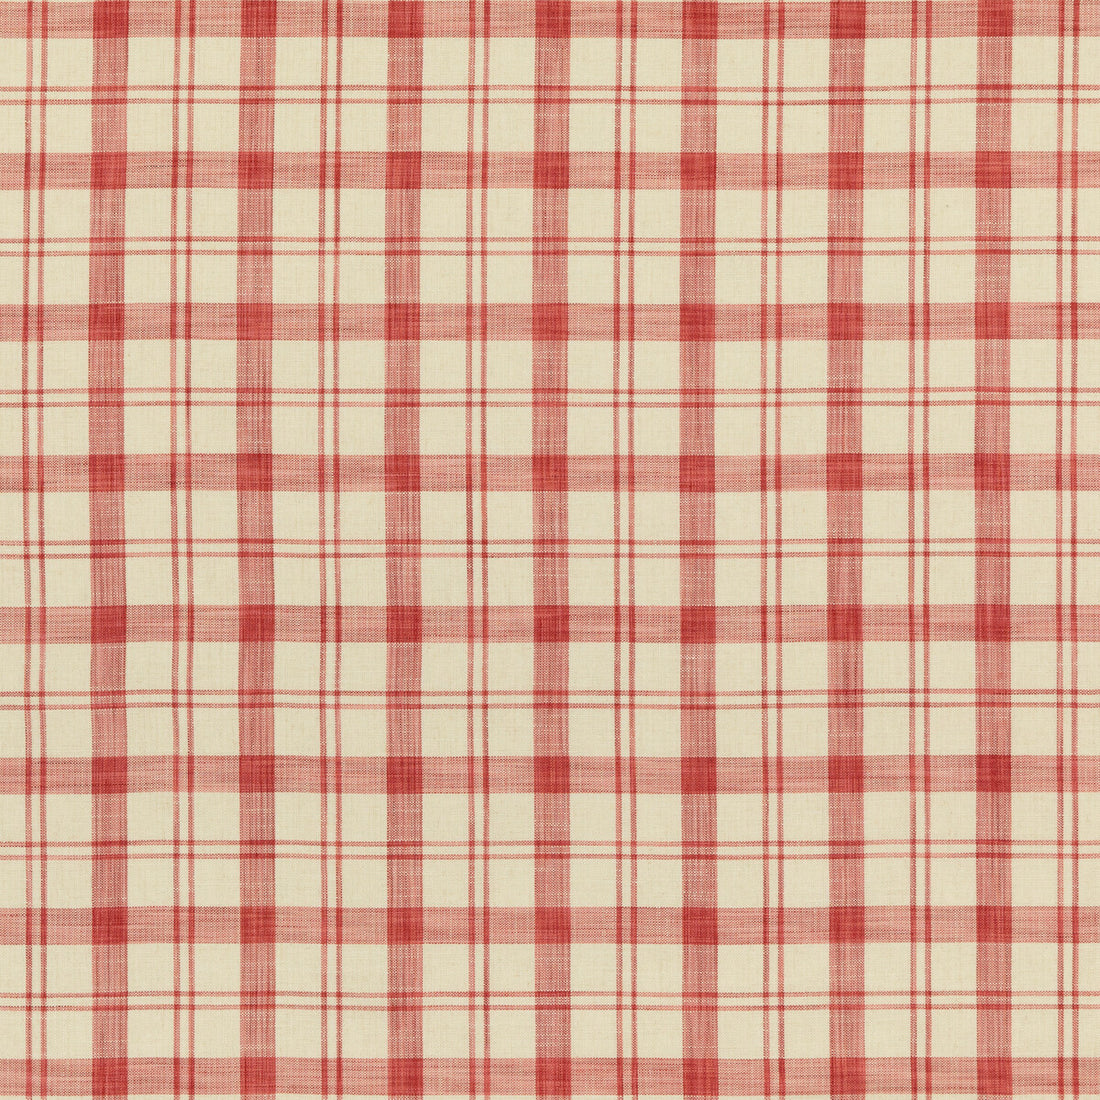 Barbery Check fabric in pink color - pattern 8019103.7.0 - by Brunschwig &amp; Fils in the Normant Checks And Stripes collection